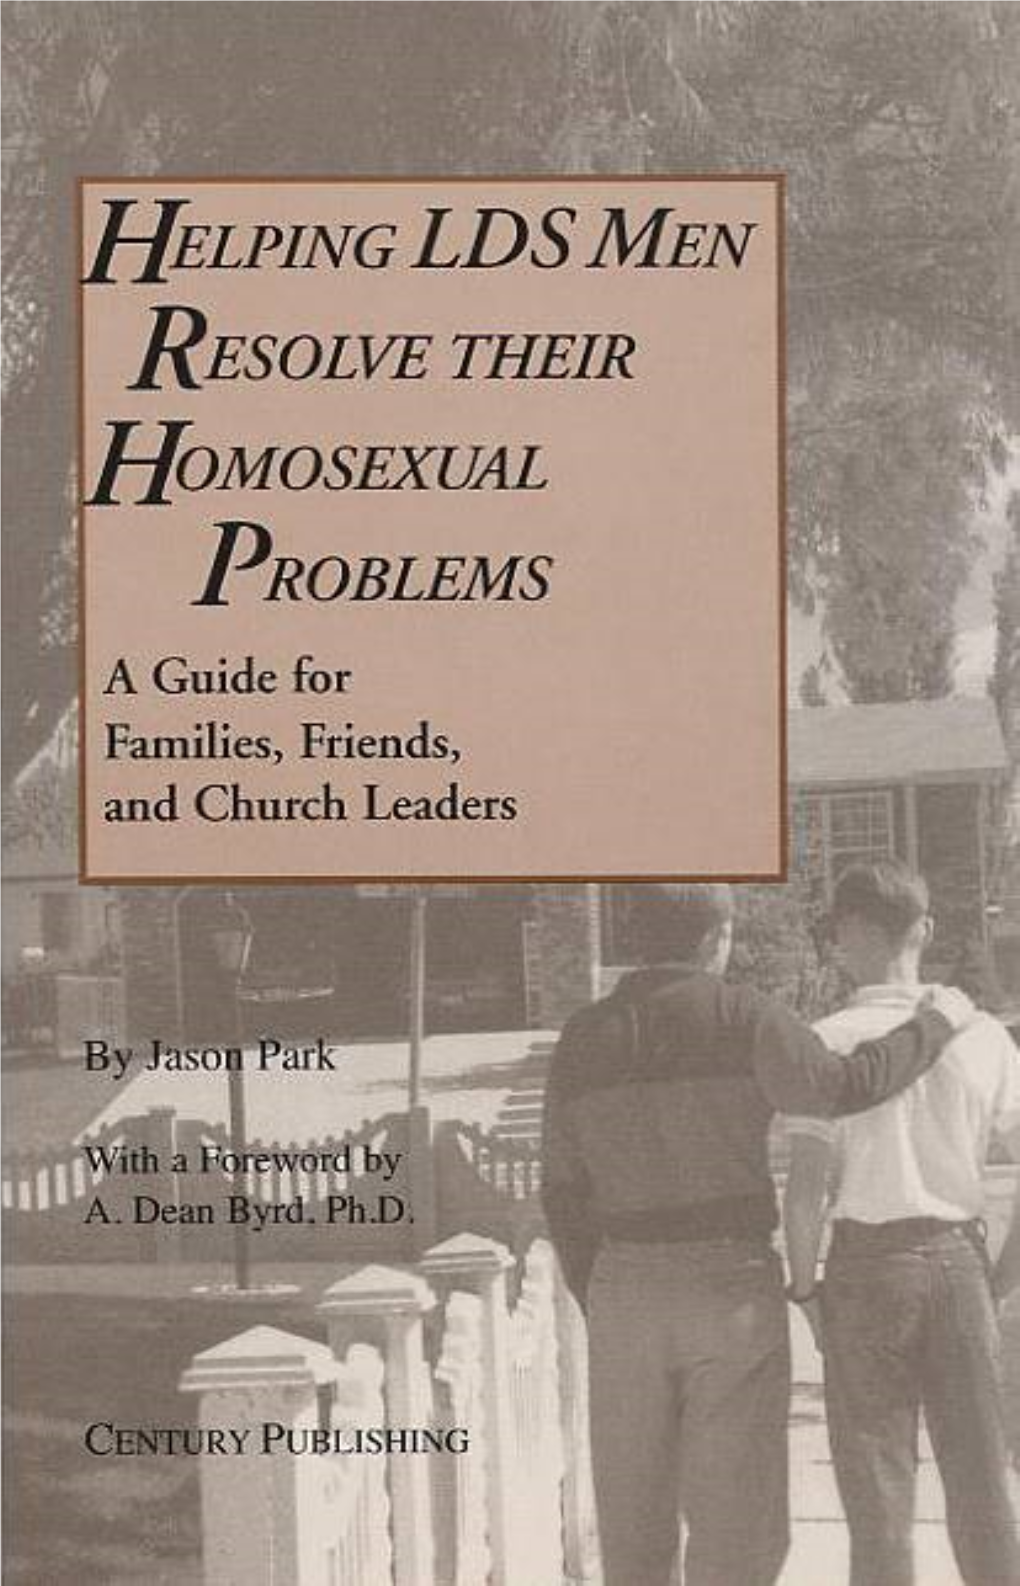 Helping LDS Men Resolve Their Homosexual Problems